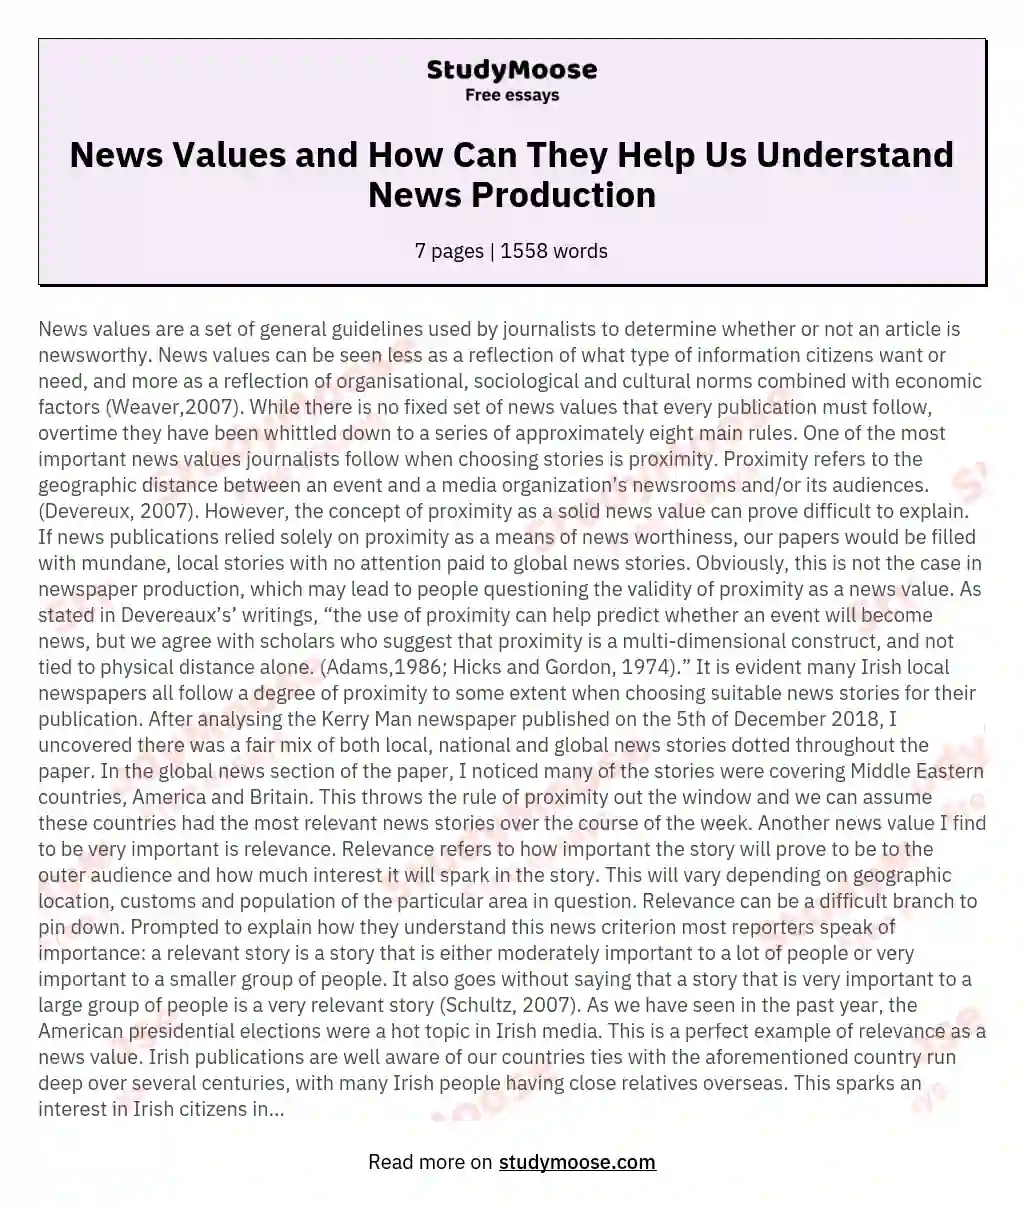 News Values and How Can They Help Us Understand News Production essay